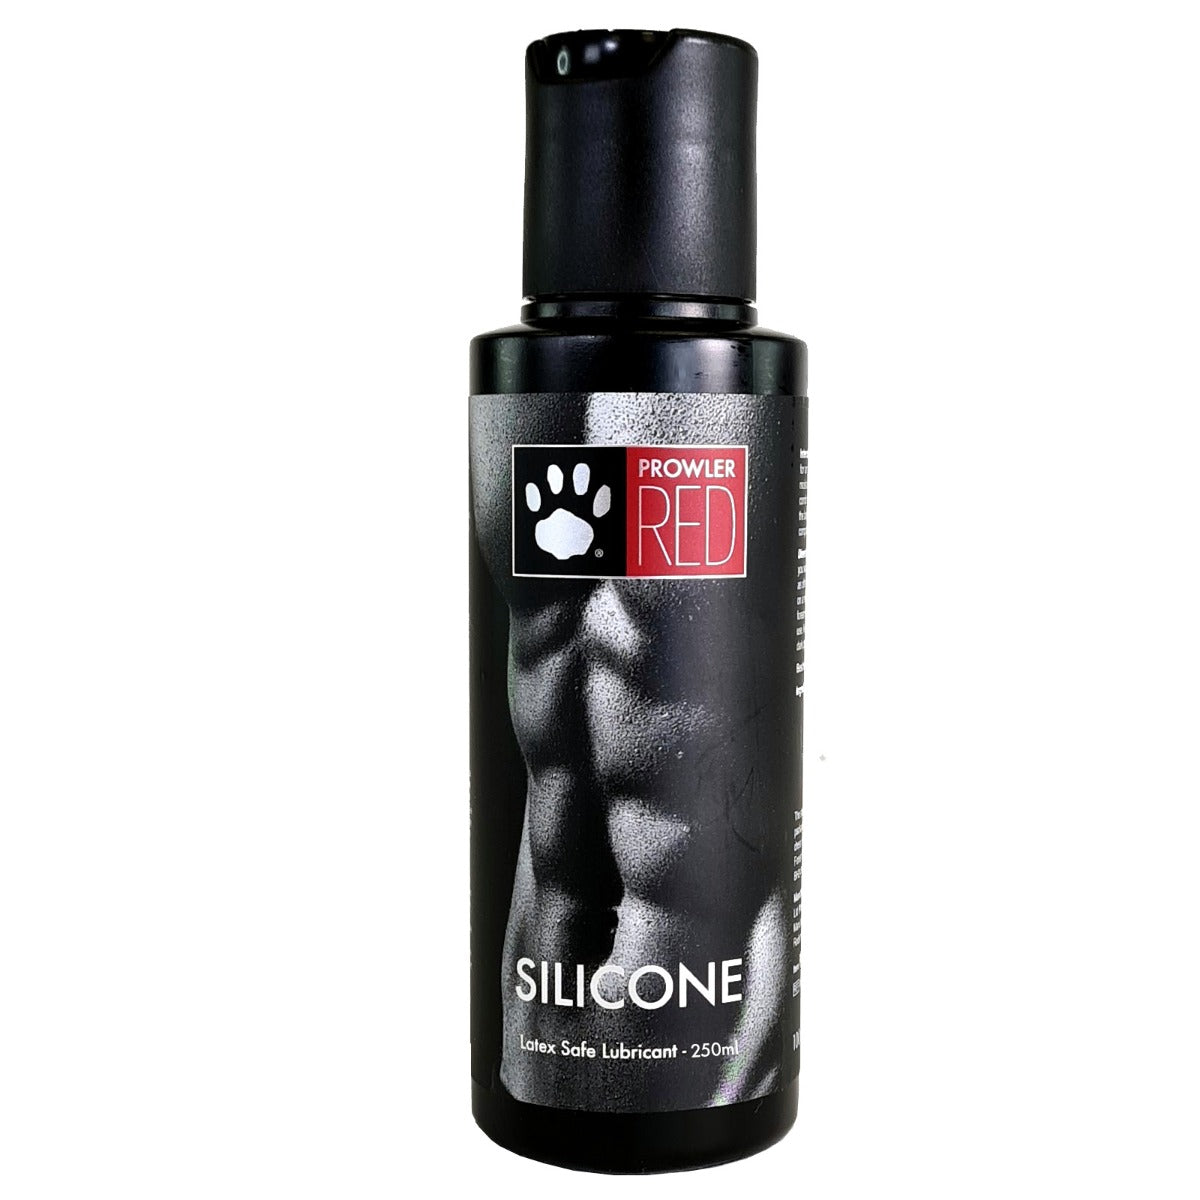 Prowler RED Silicone Lube (7021169279140)